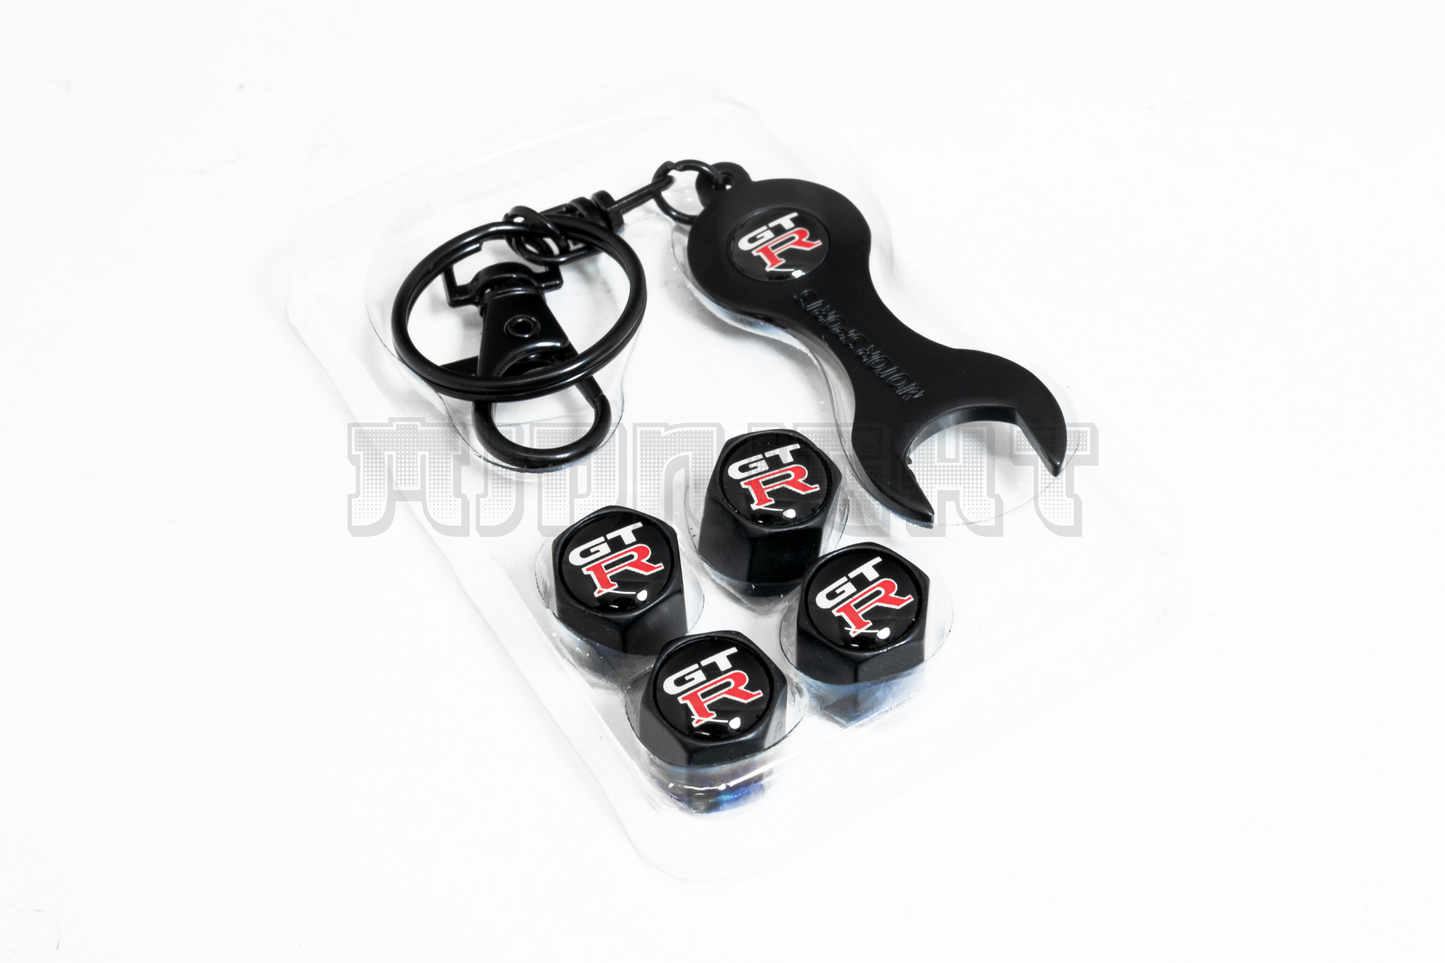 Nissan GT-R Valve Stem Caps With Wrench Keychain